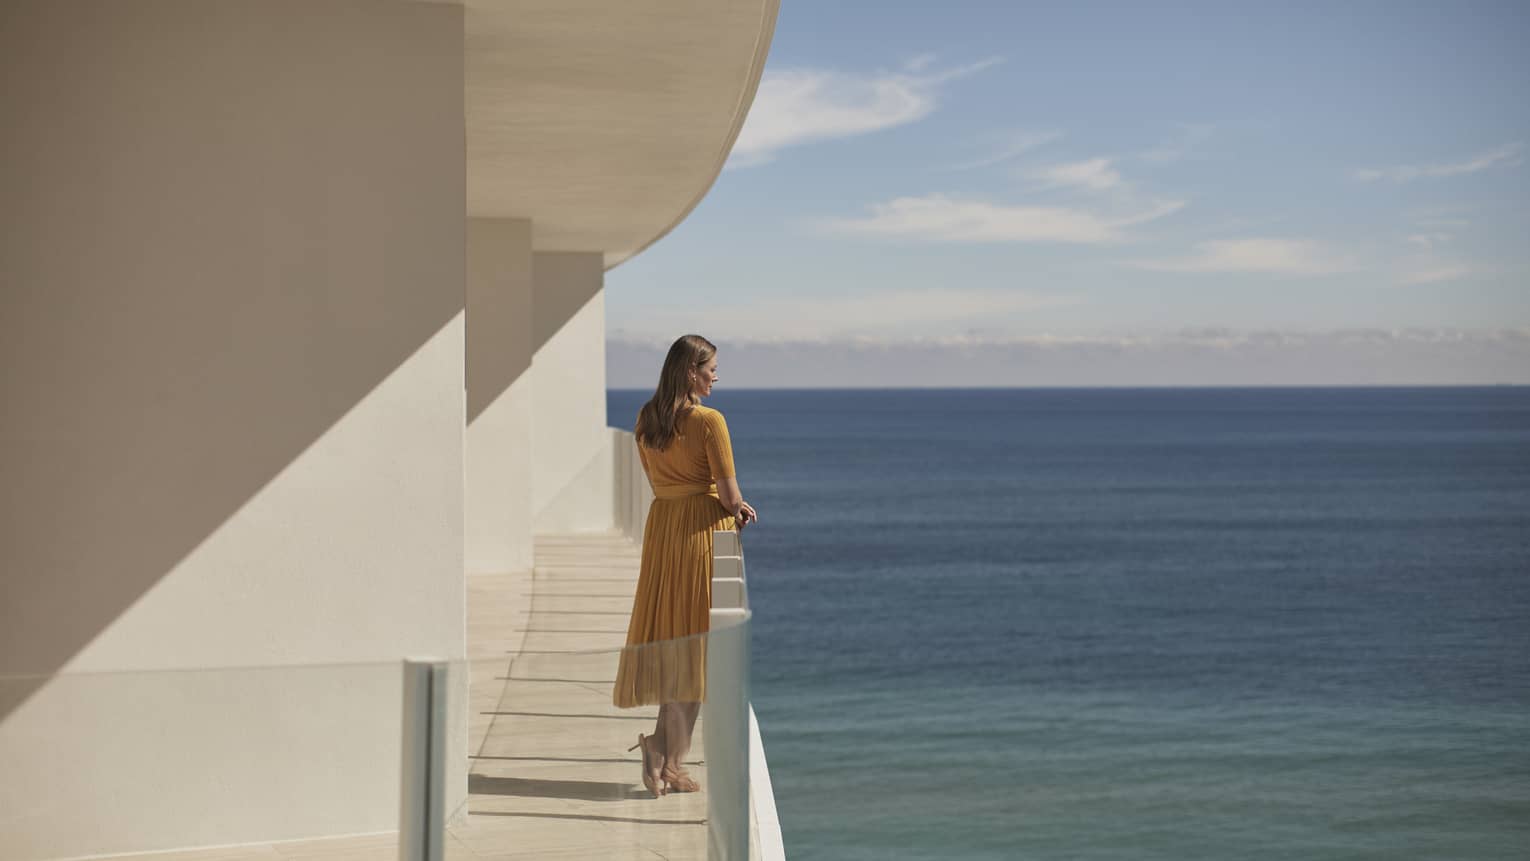 A woman standing on a balcony  of a white stone building with the ocean in the background.